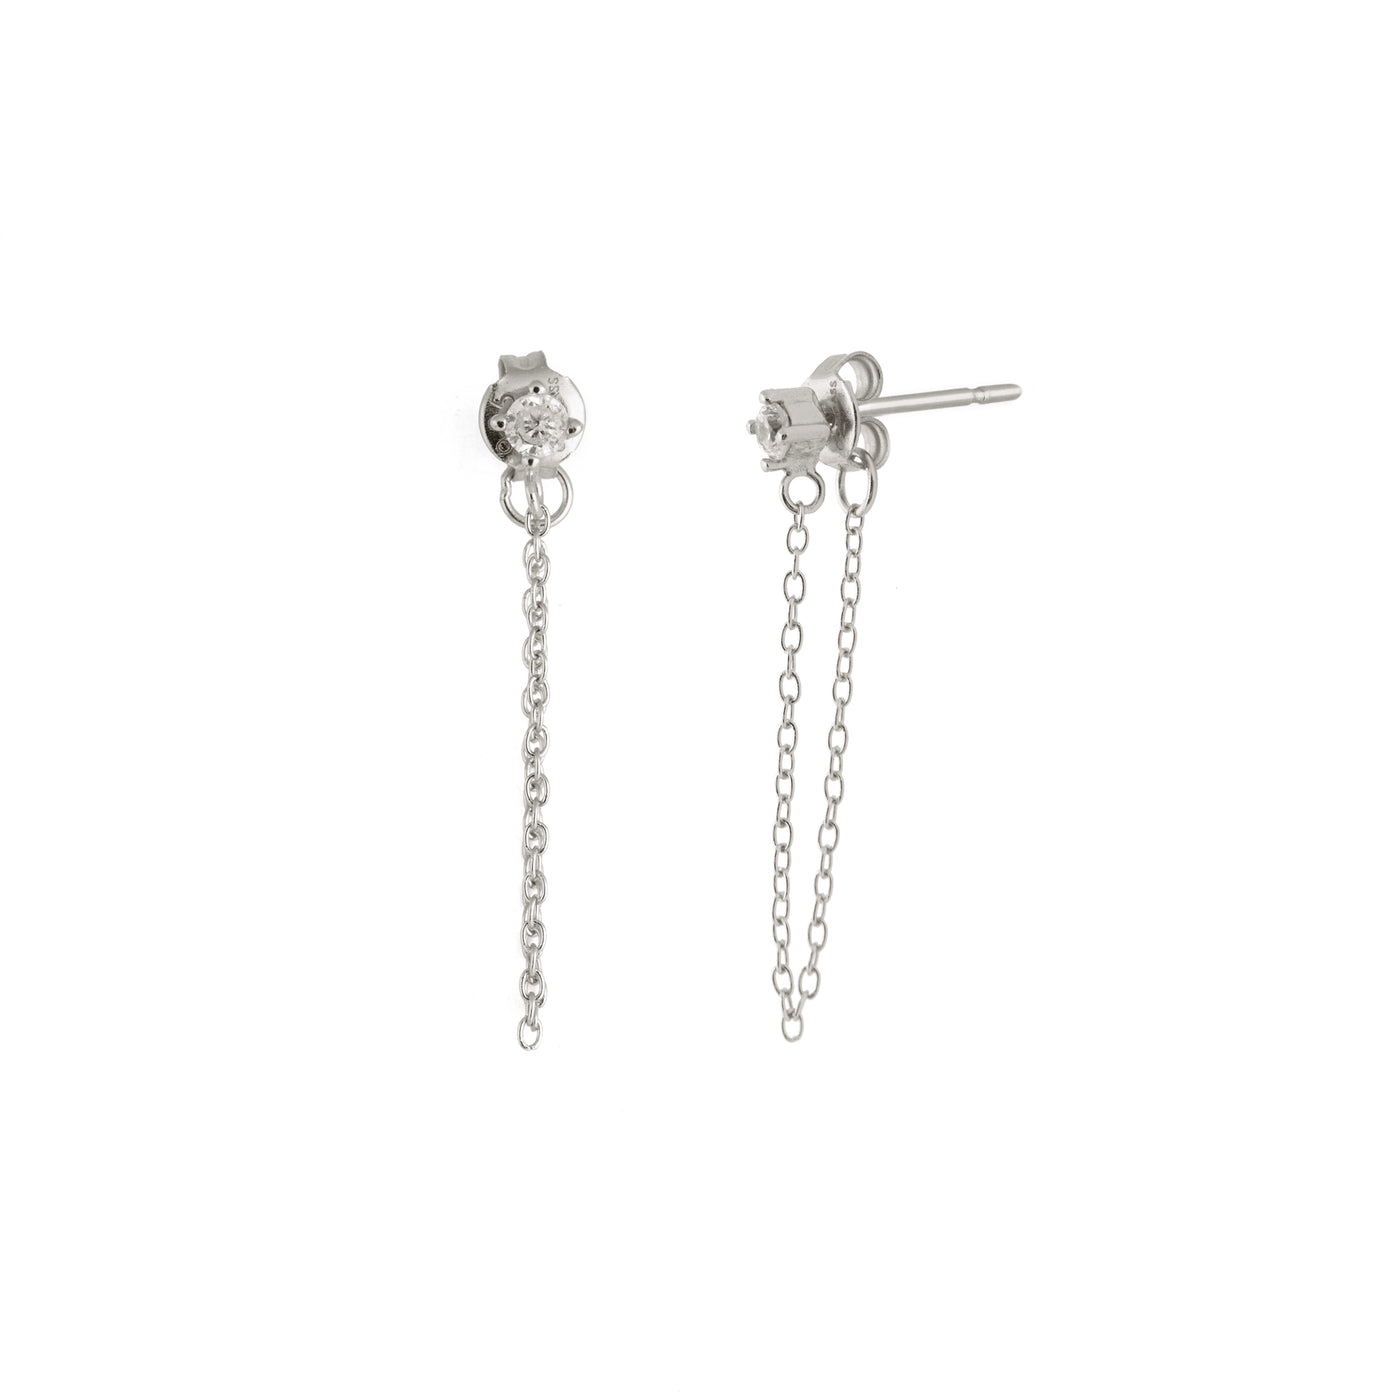 Chain Studs - Argent Sterling Chain Studs - Argent Sterling